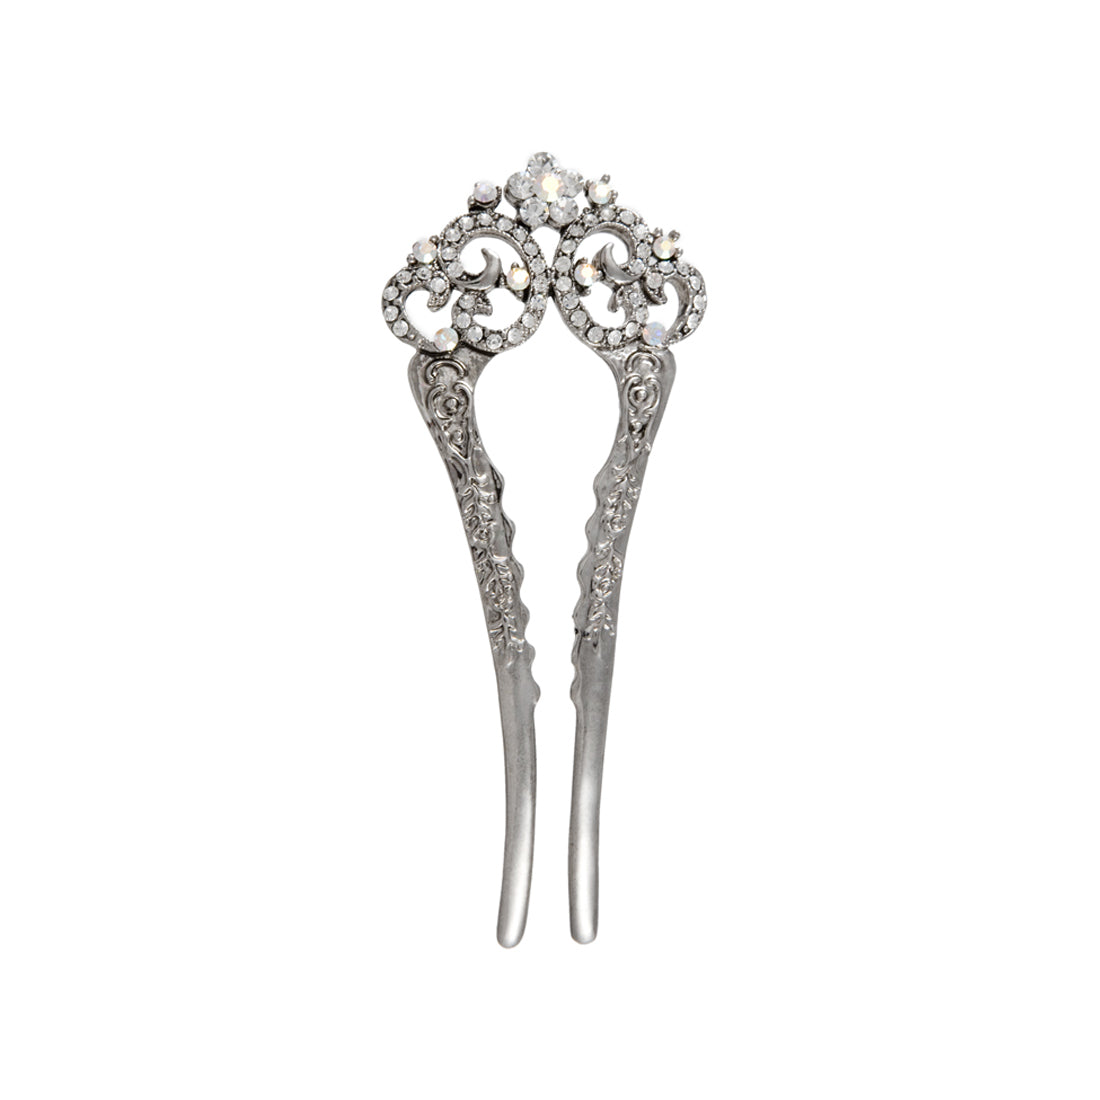 A Touch of Elegance Vintage Style Hair Pin